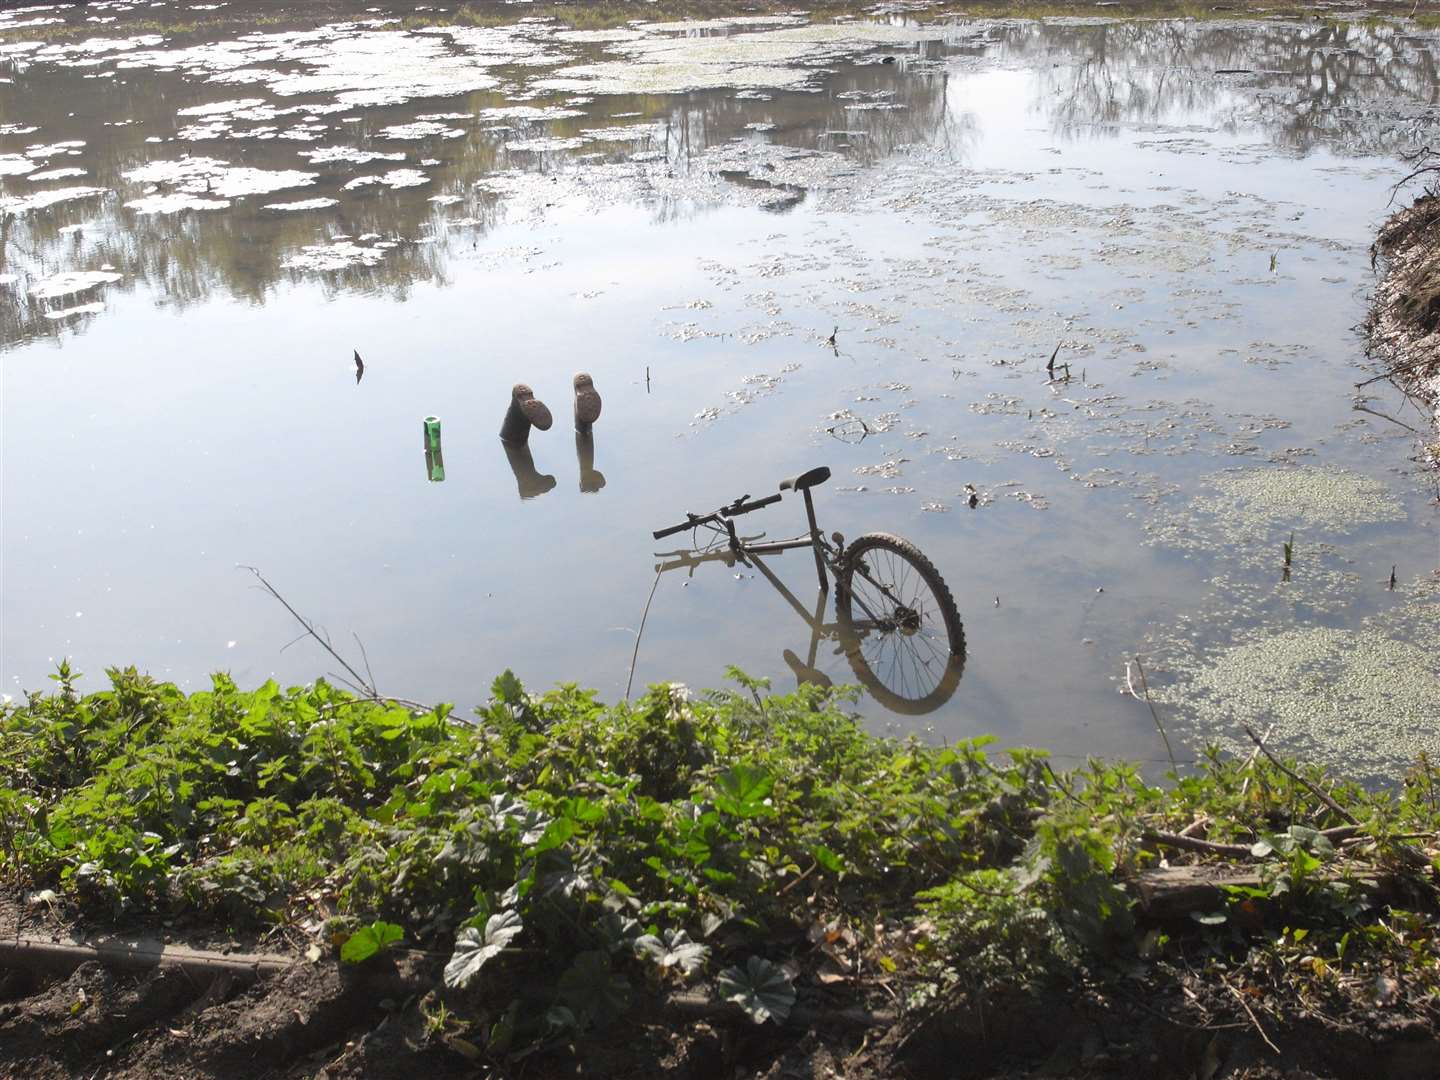 An April Fool's prank appears to show a drunk cyclist in Elmstone village pond in Preston near Canterbury. Image: Oliver Chapman